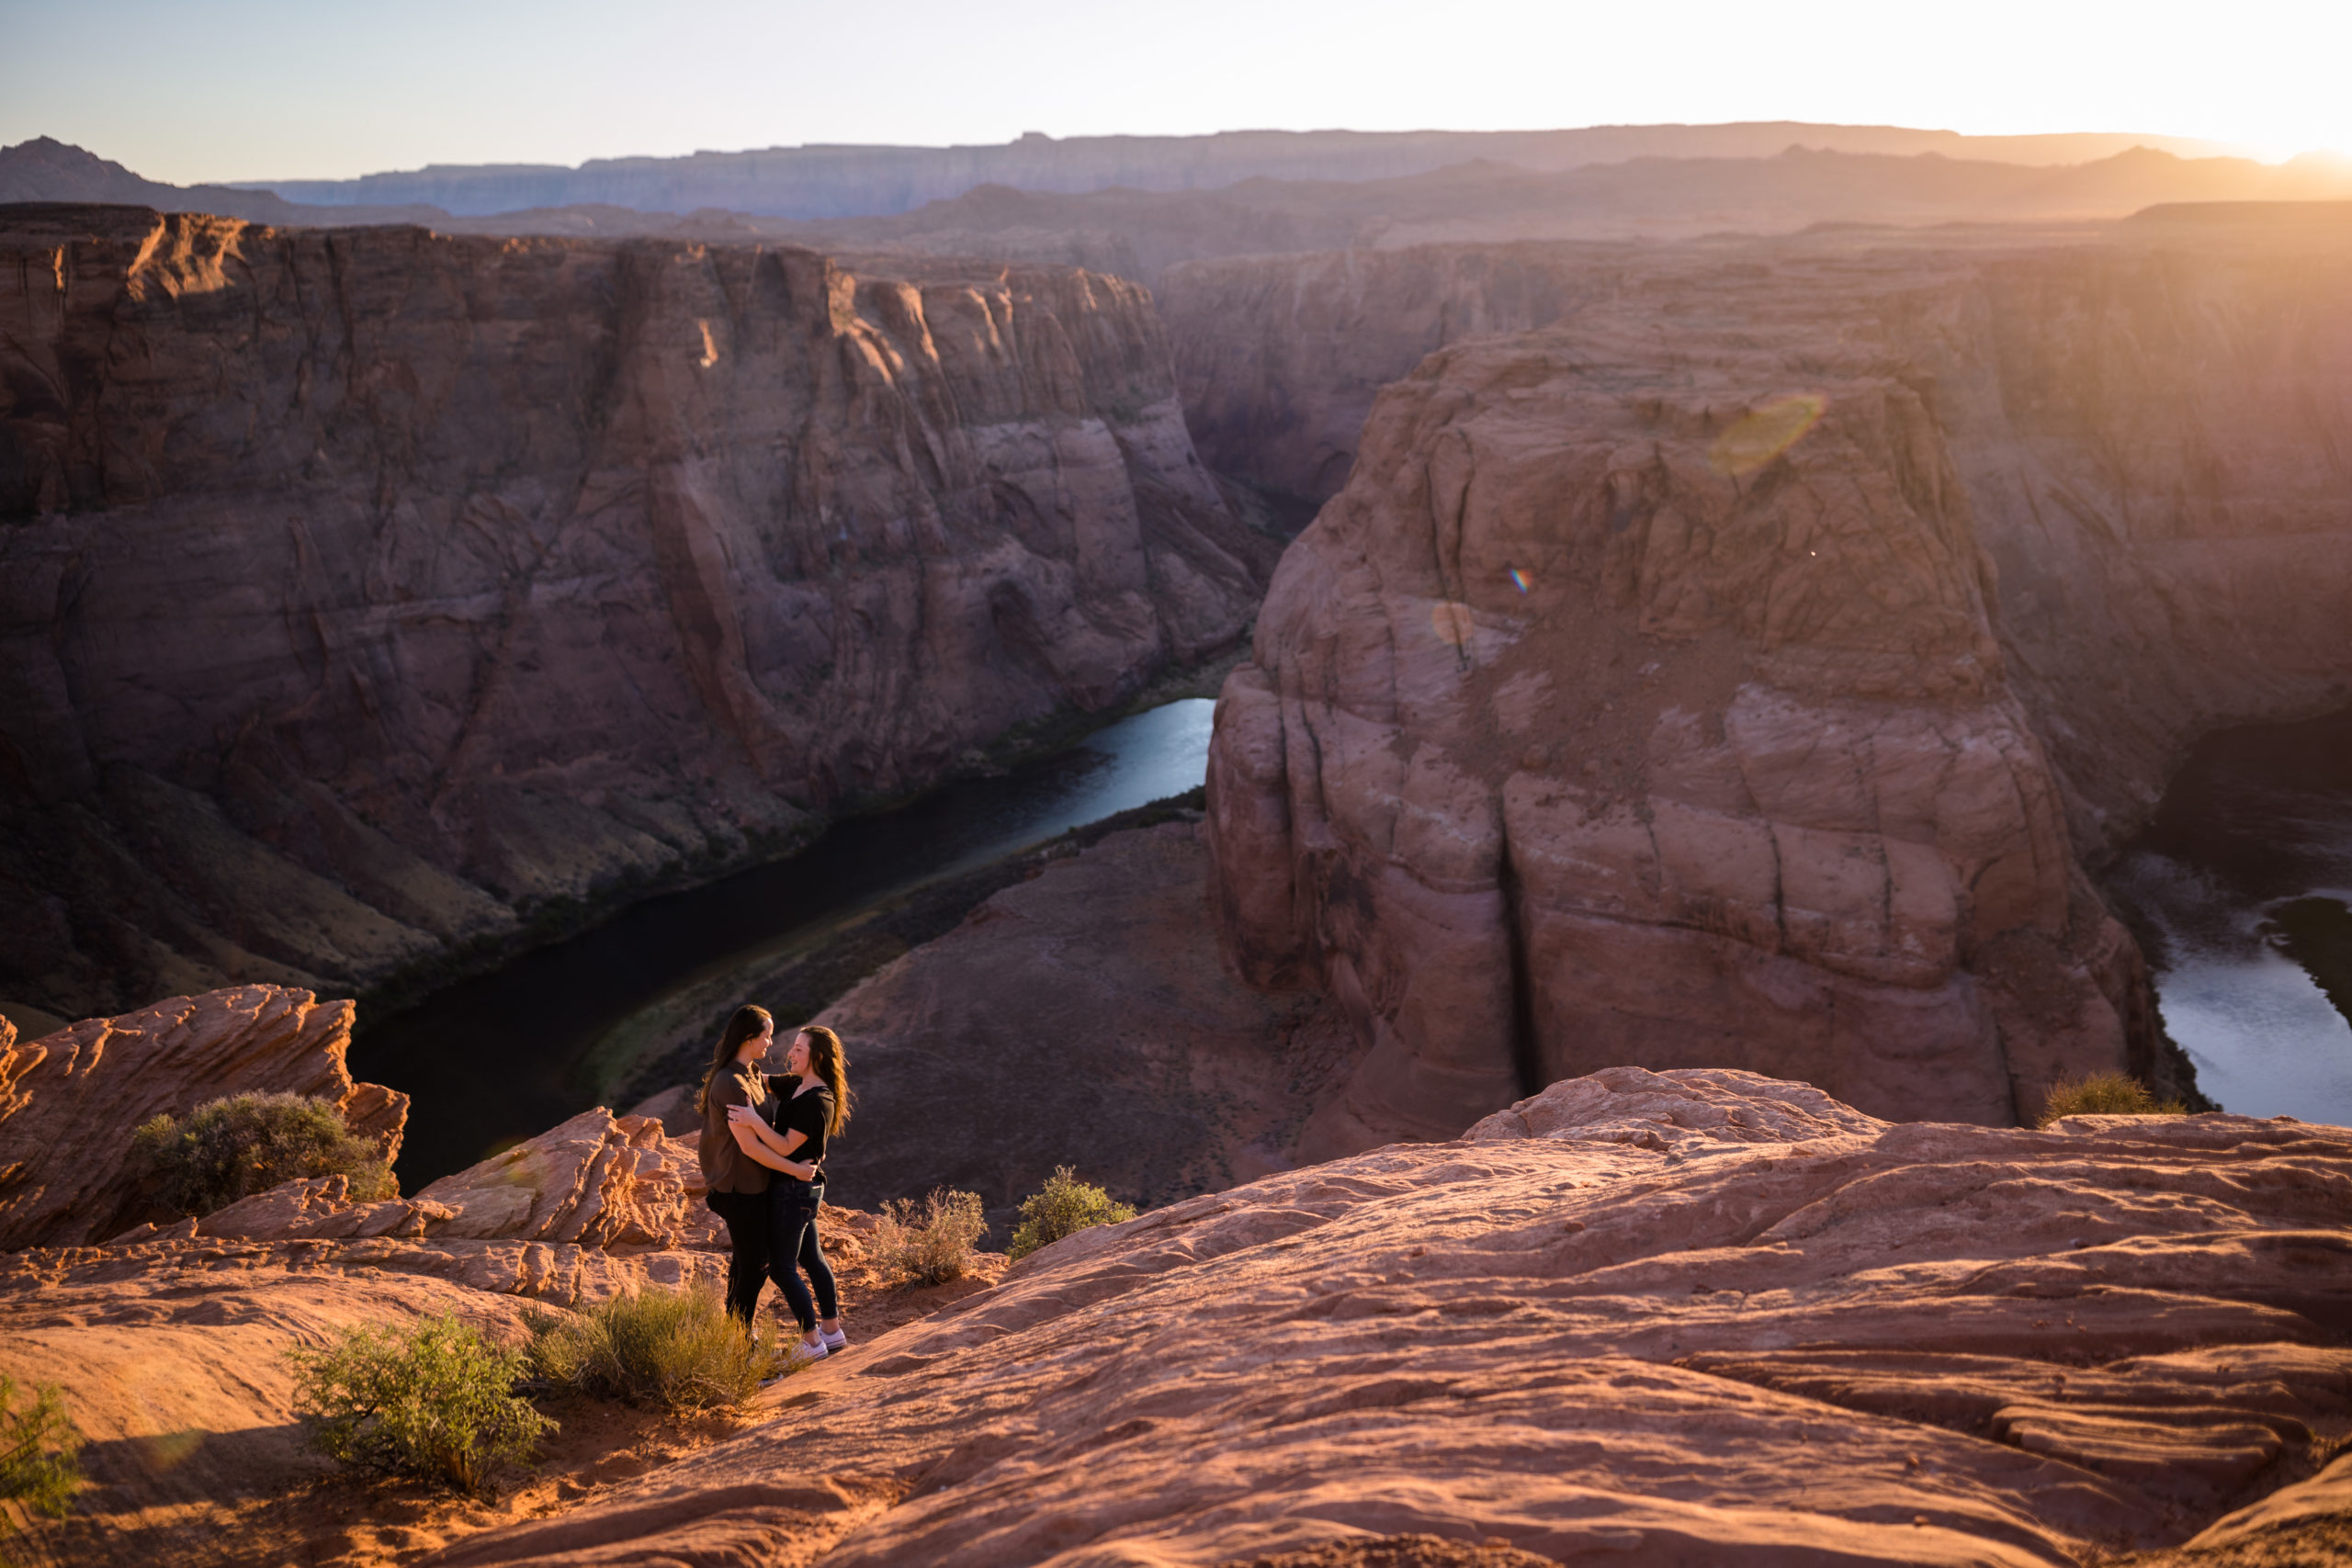 Couple sharing an embrace with a great look out onto Horseshoe Bend, captured by Makayla MacGarvey